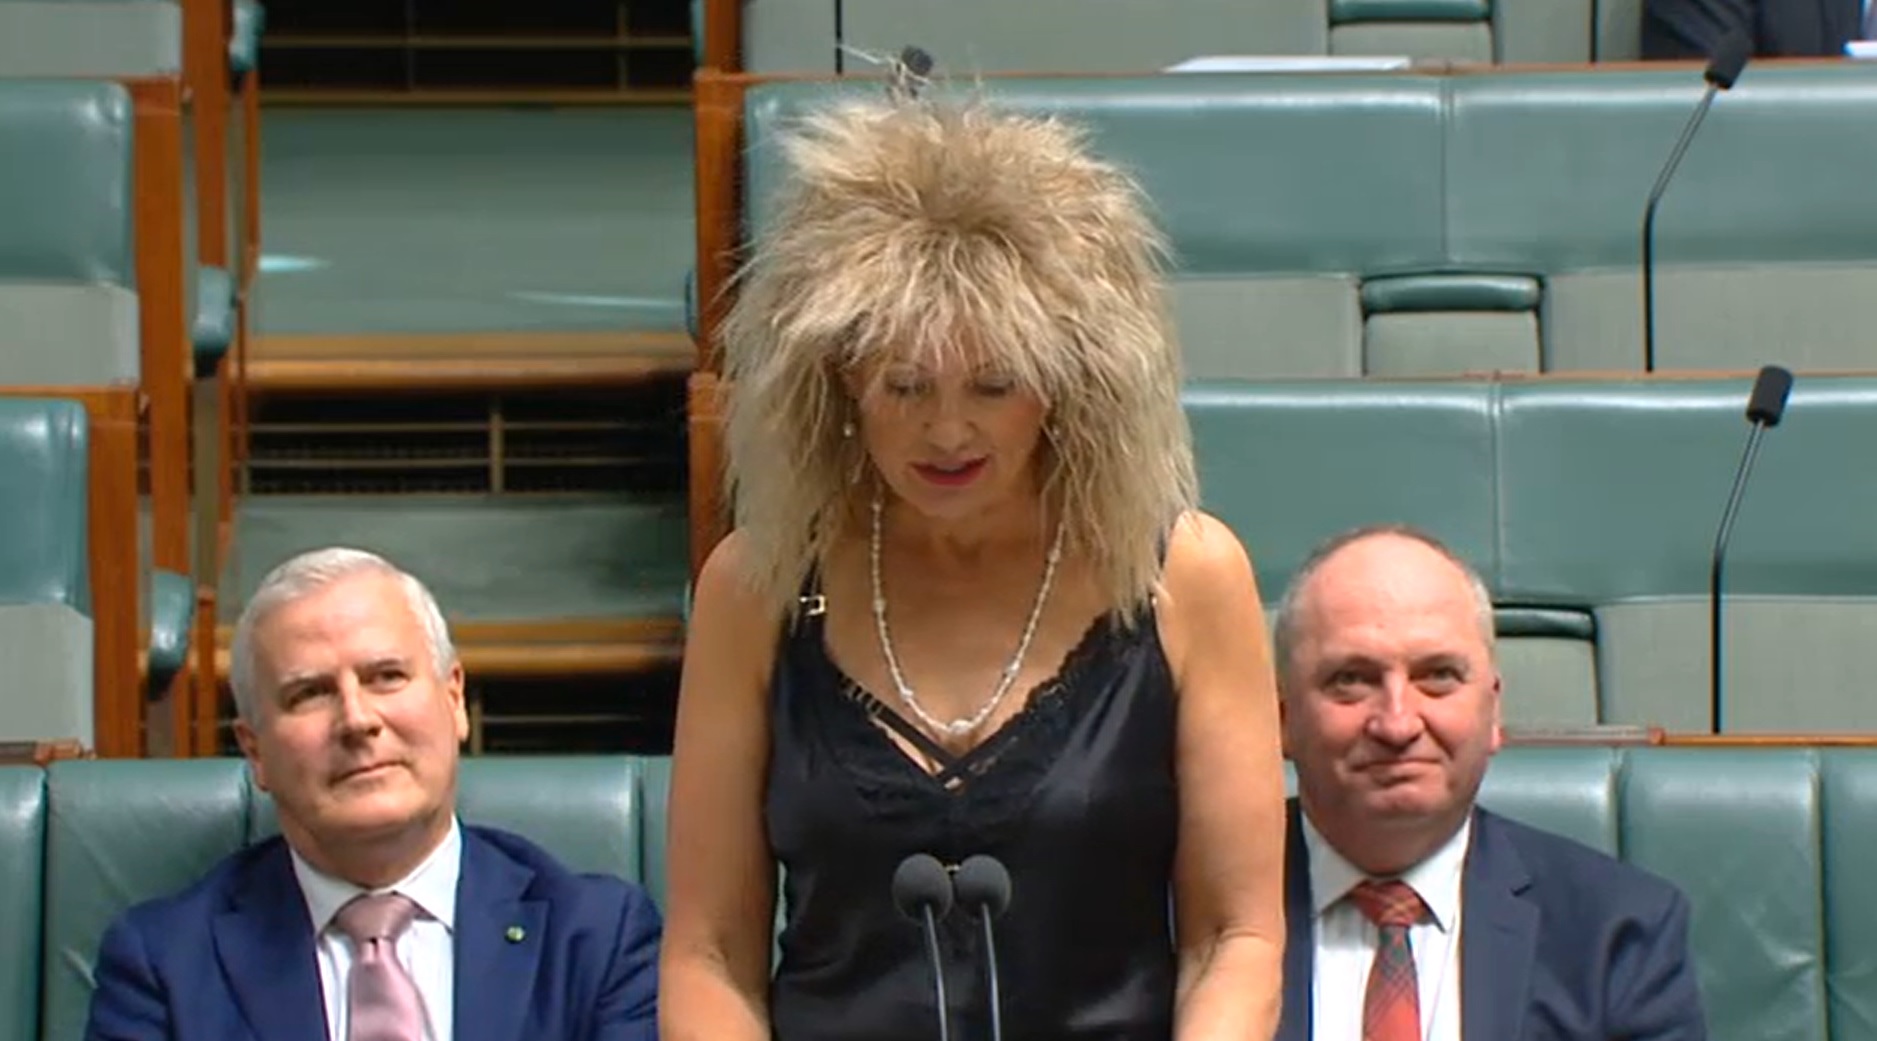 The deputy leader of Australia’s Liberal Party turned heads and raised money in parliament by attending dressed as musical icon Tina Turner